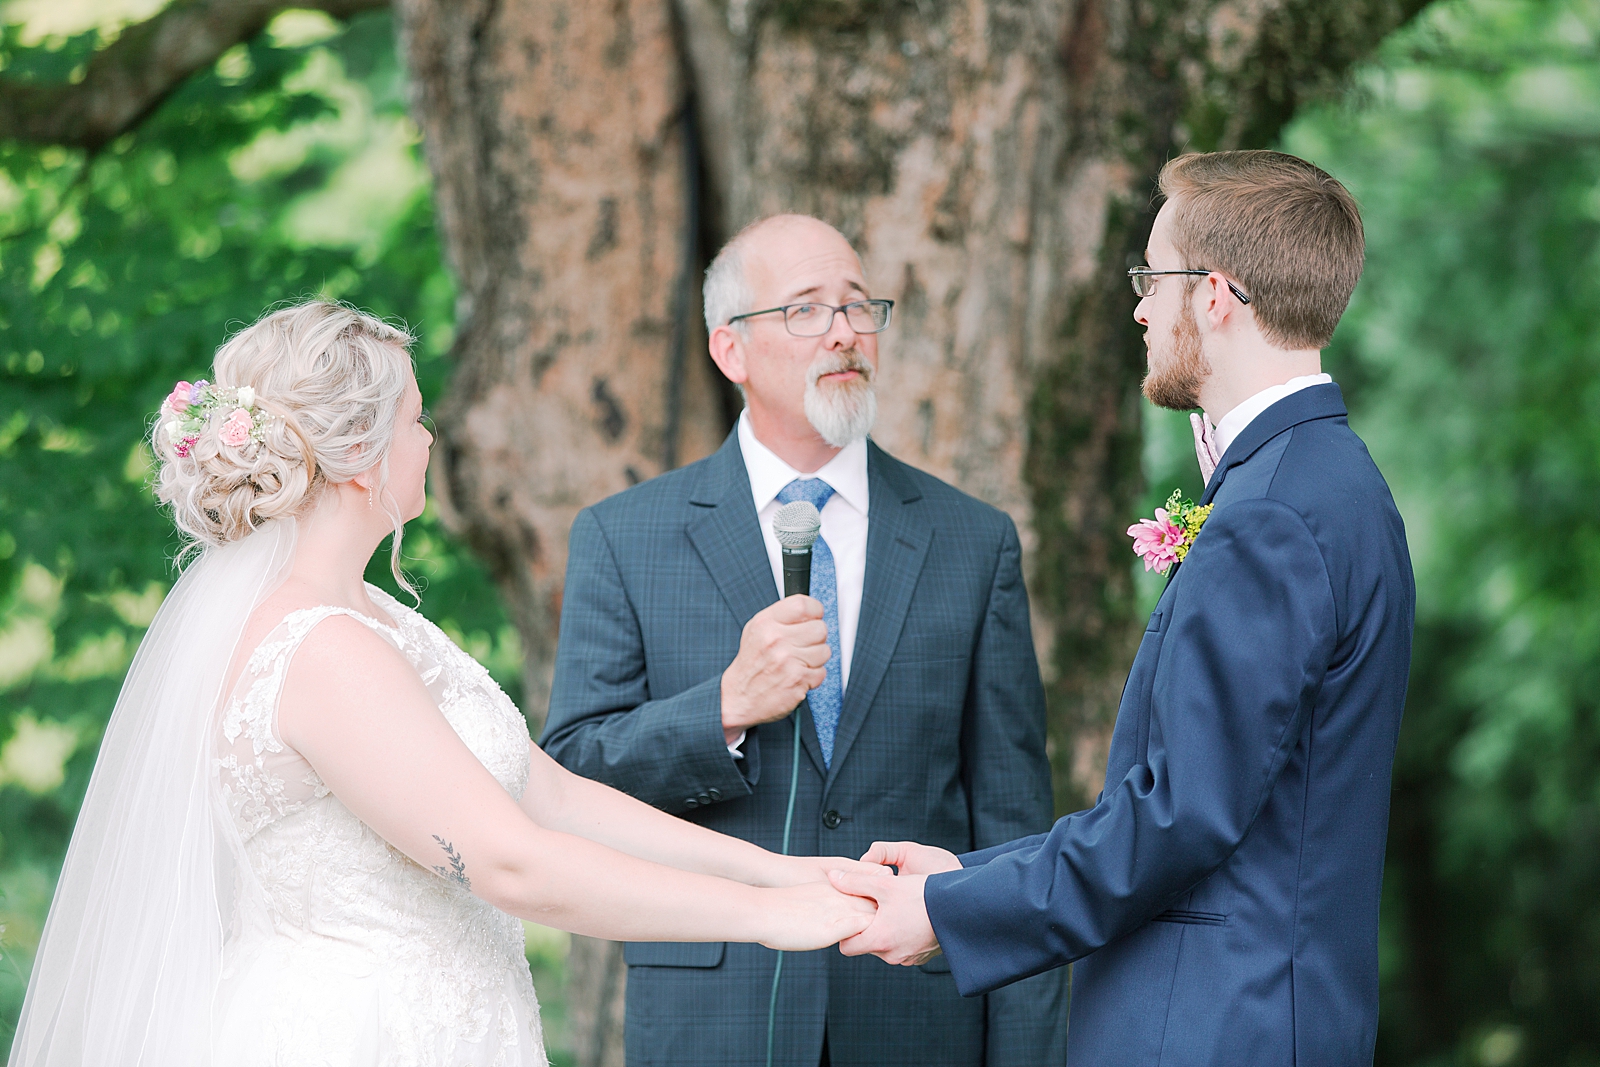 Black Fox Farms Garden Wedding Ceremony Couple holding hands and sharing vows Photo